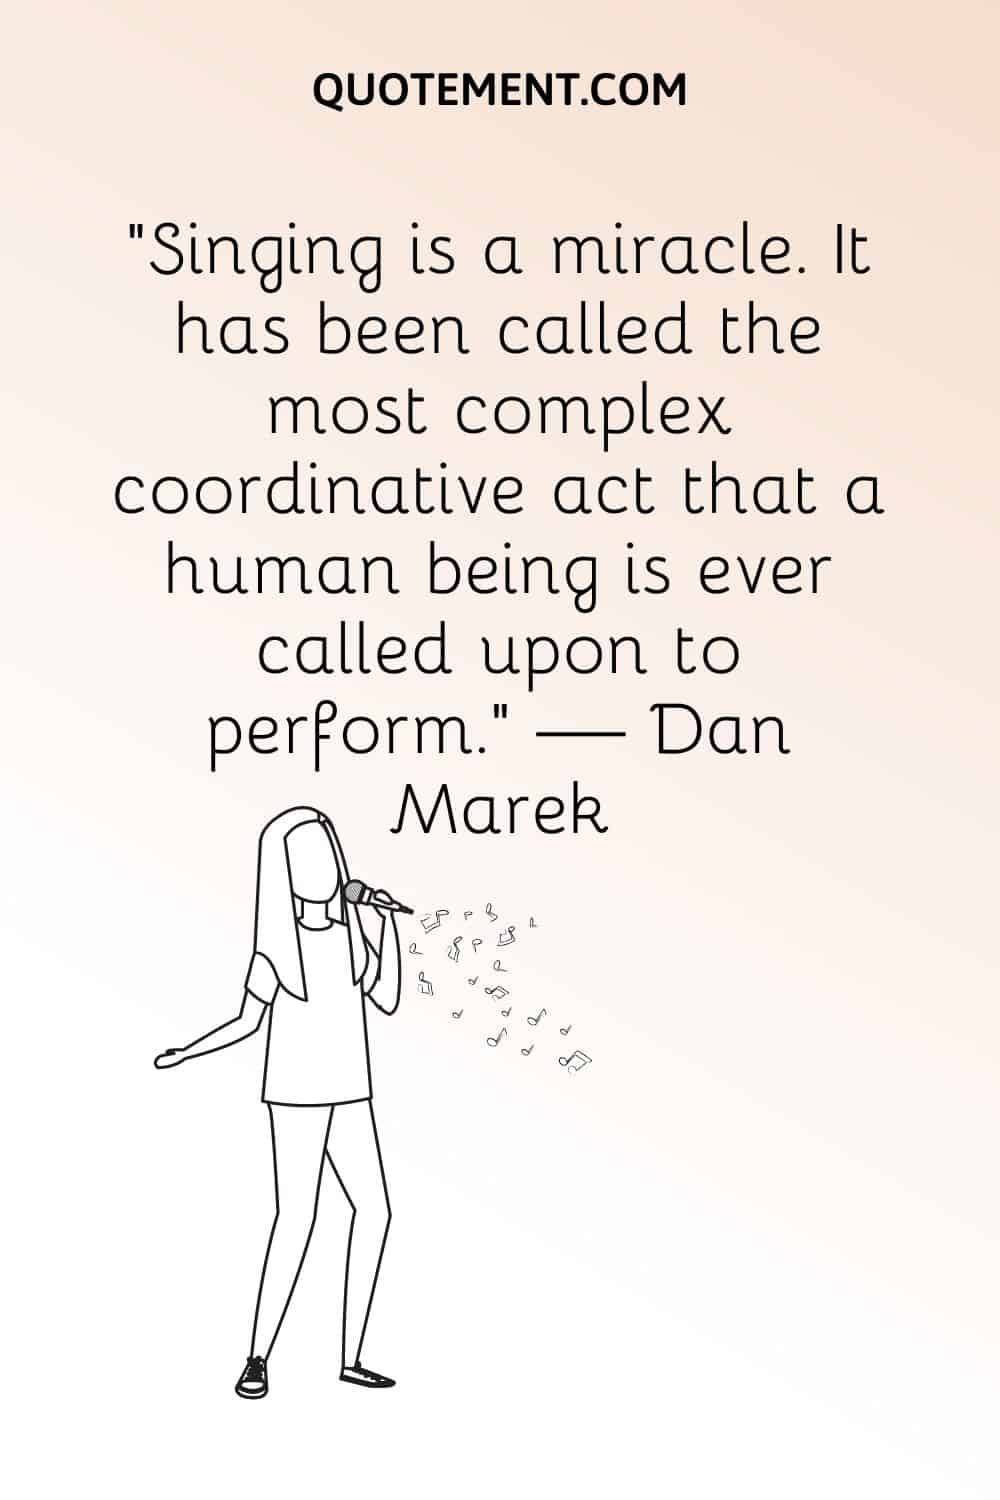 “Singing is a miracle. It has been called the most complex coordinative act that a human being is ever called upon to perform.” — Dan Marek